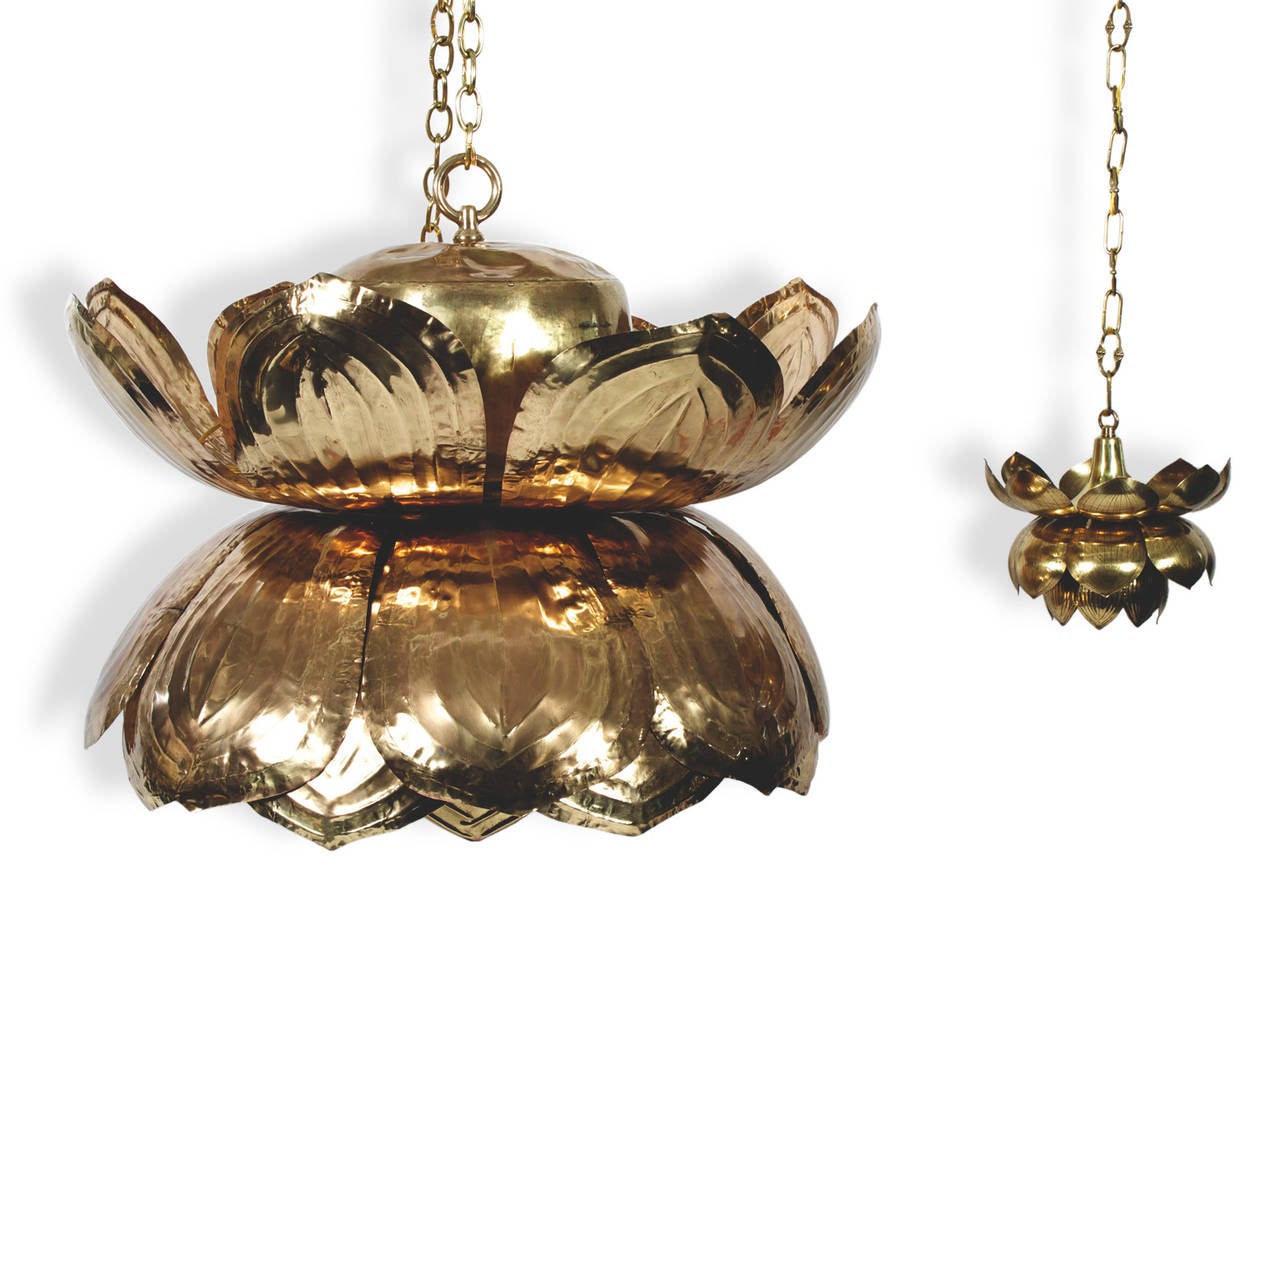 An exceptional large, custom hand-hammered, solid brass lotus chandelier or pendant light. This Mid-Century fixture is handsome and bold. A modern take on an ancient form, drawn from nature, will work in a variety of settings and be the focal point